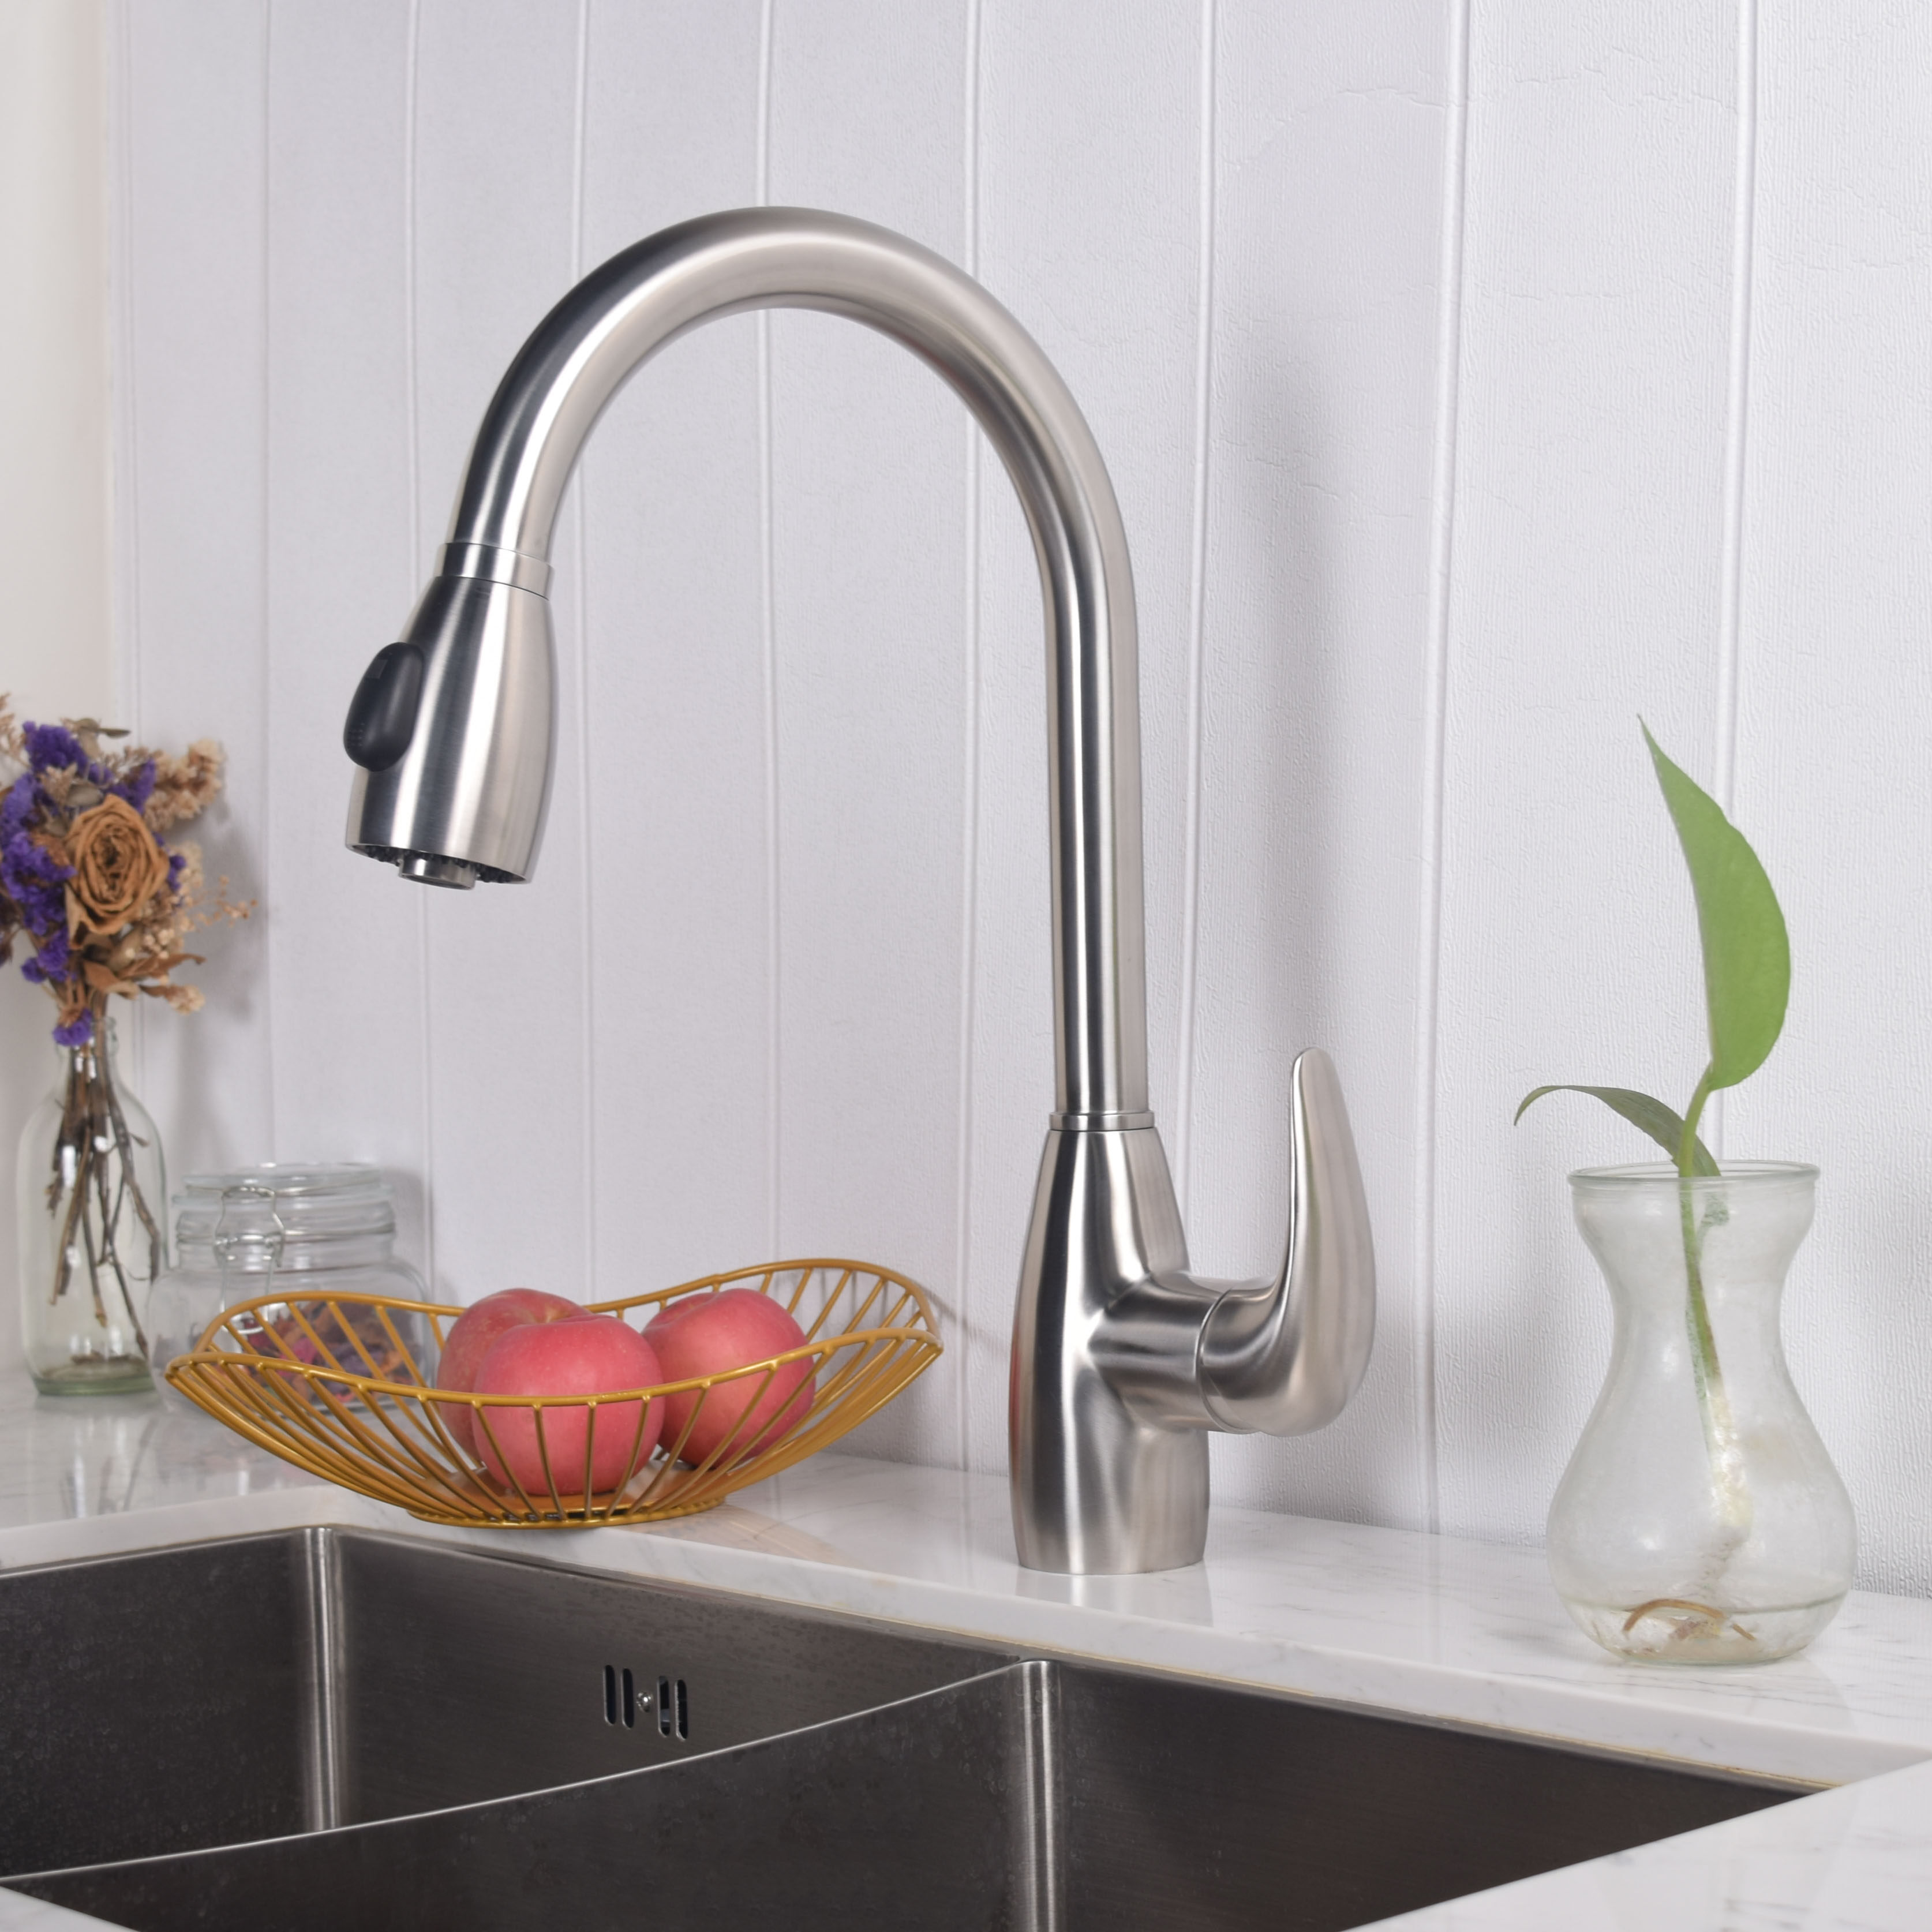 The Timeless Elegance of Stainless Steel Faucets